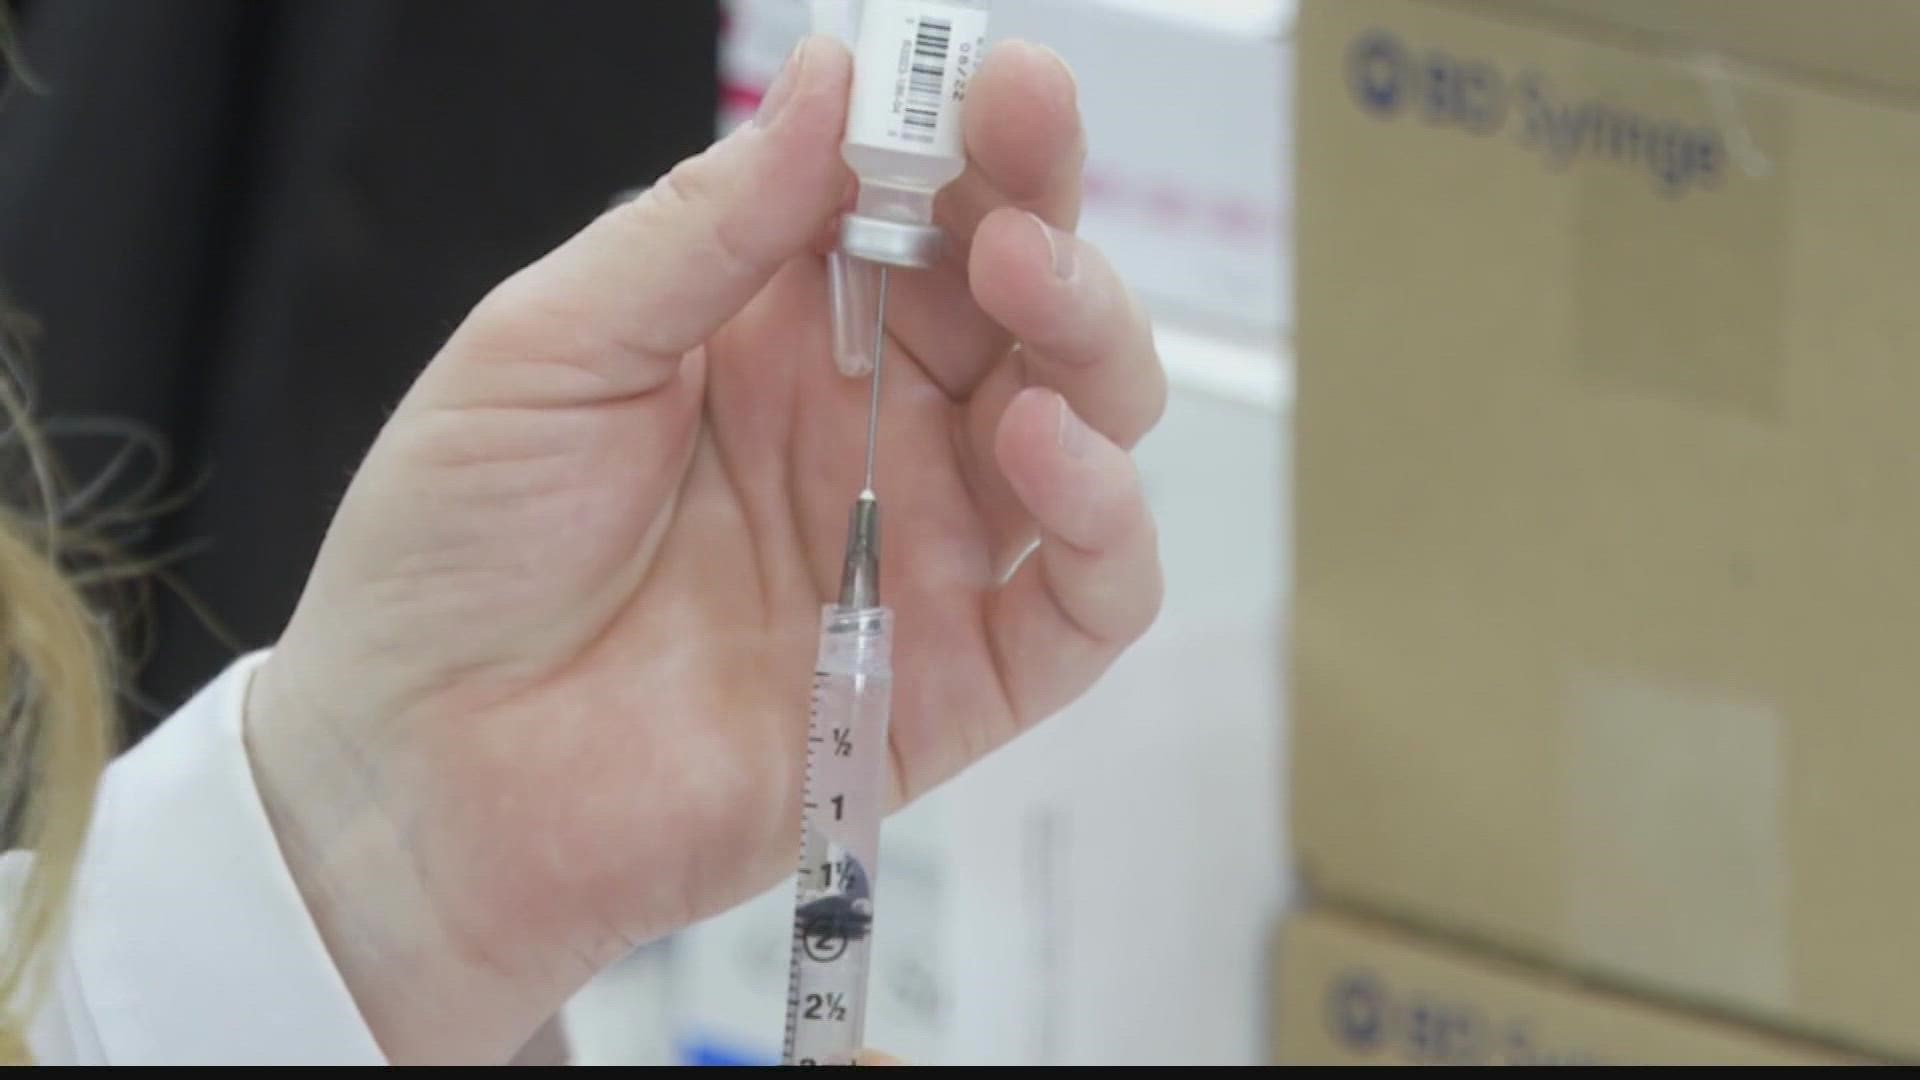 Childhood vaccinations are lagging in Alabama, and public health officials are urging families to get their kids vaccinated.